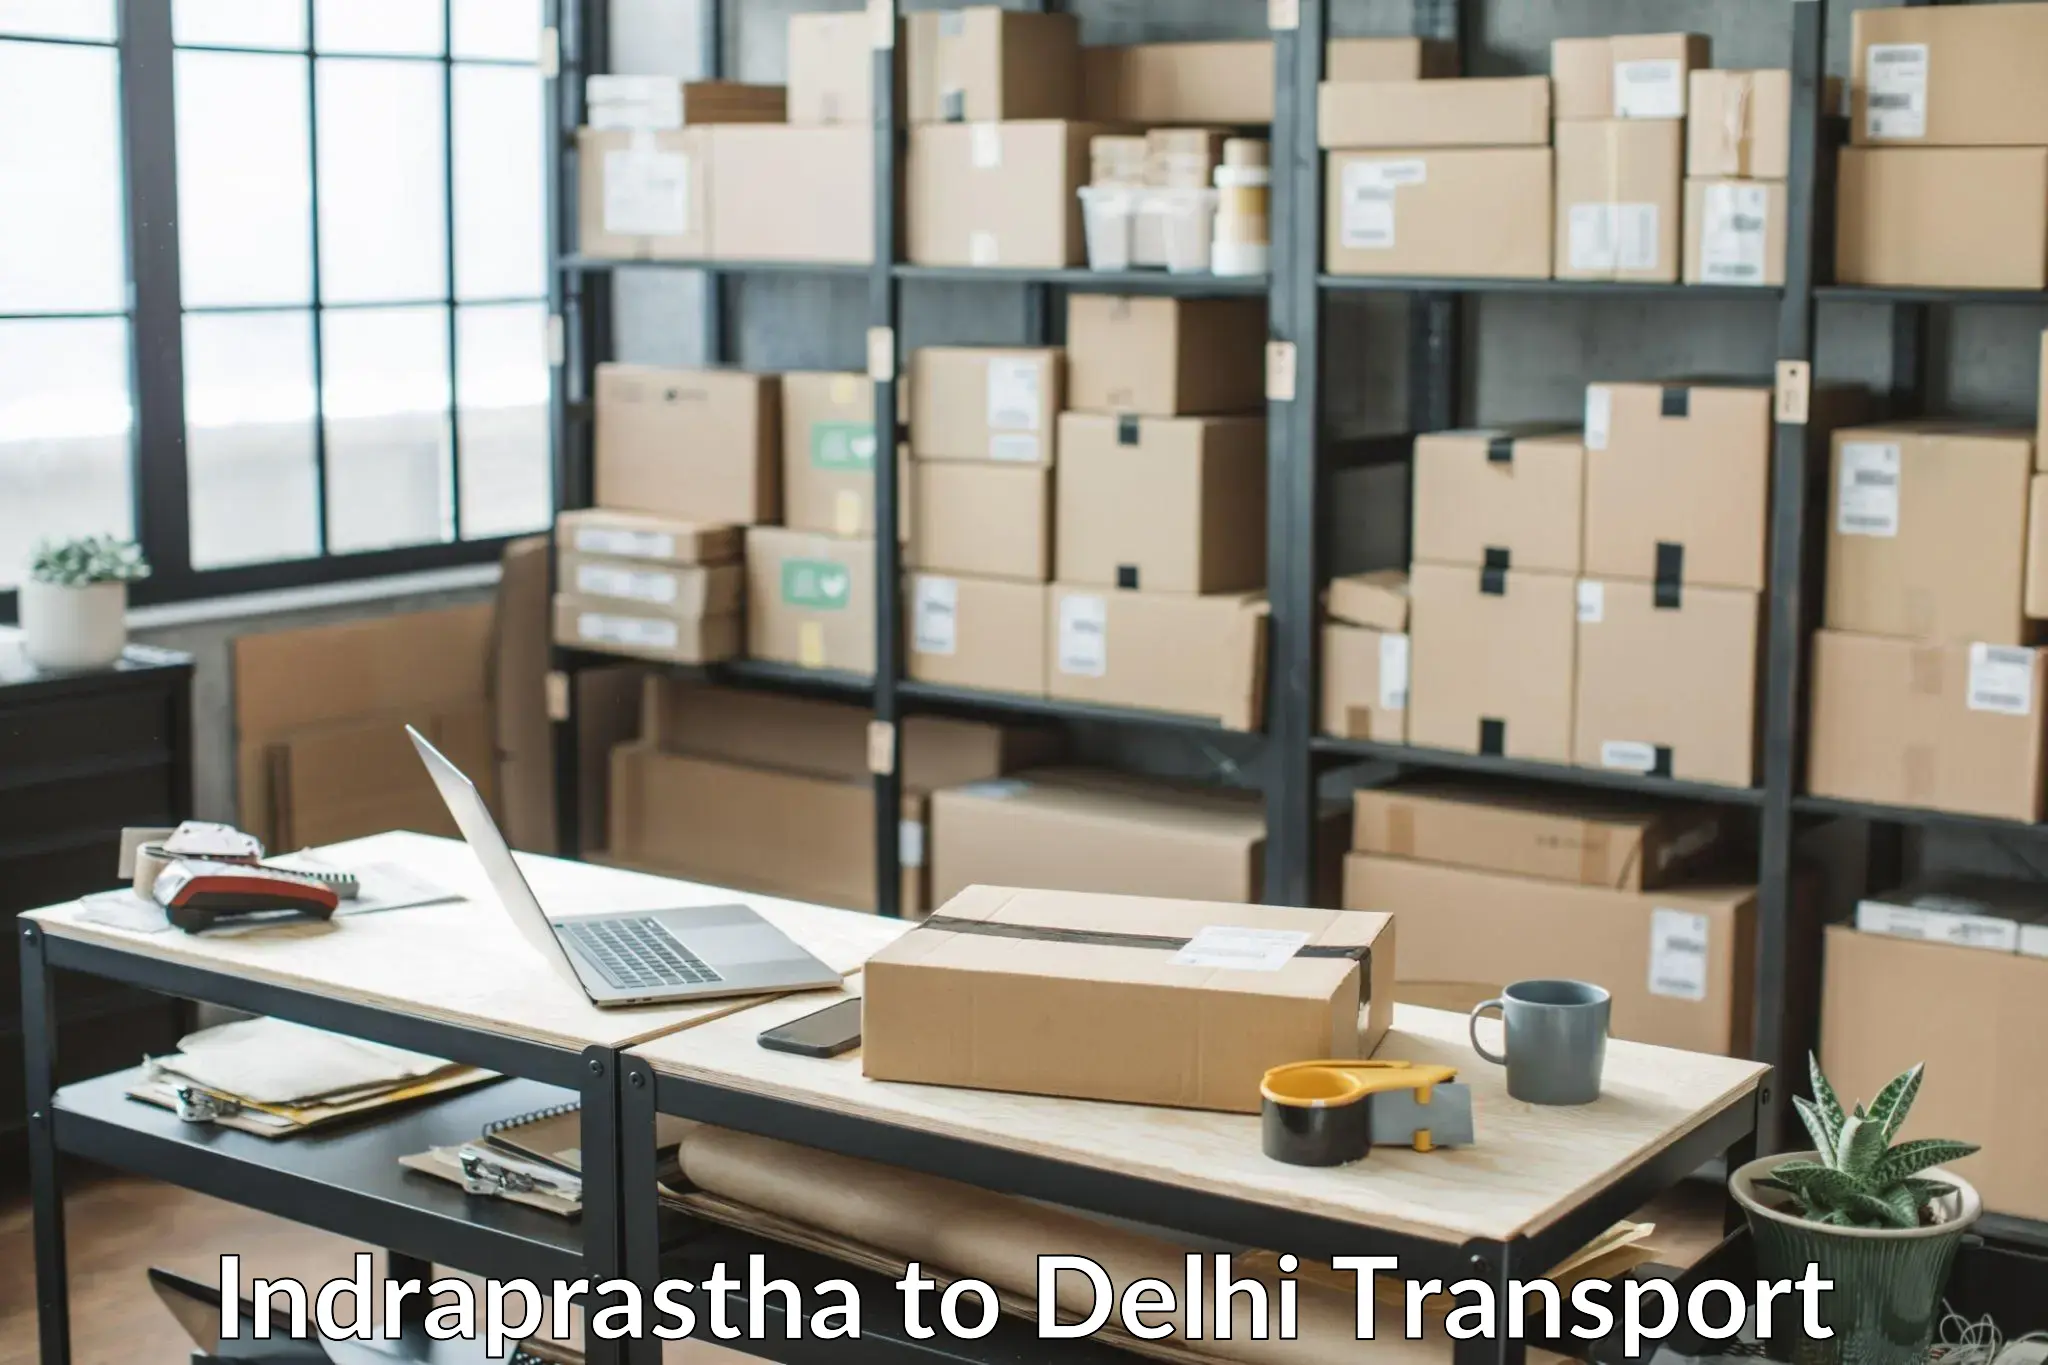 Cycle transportation service Indraprastha to East Delhi